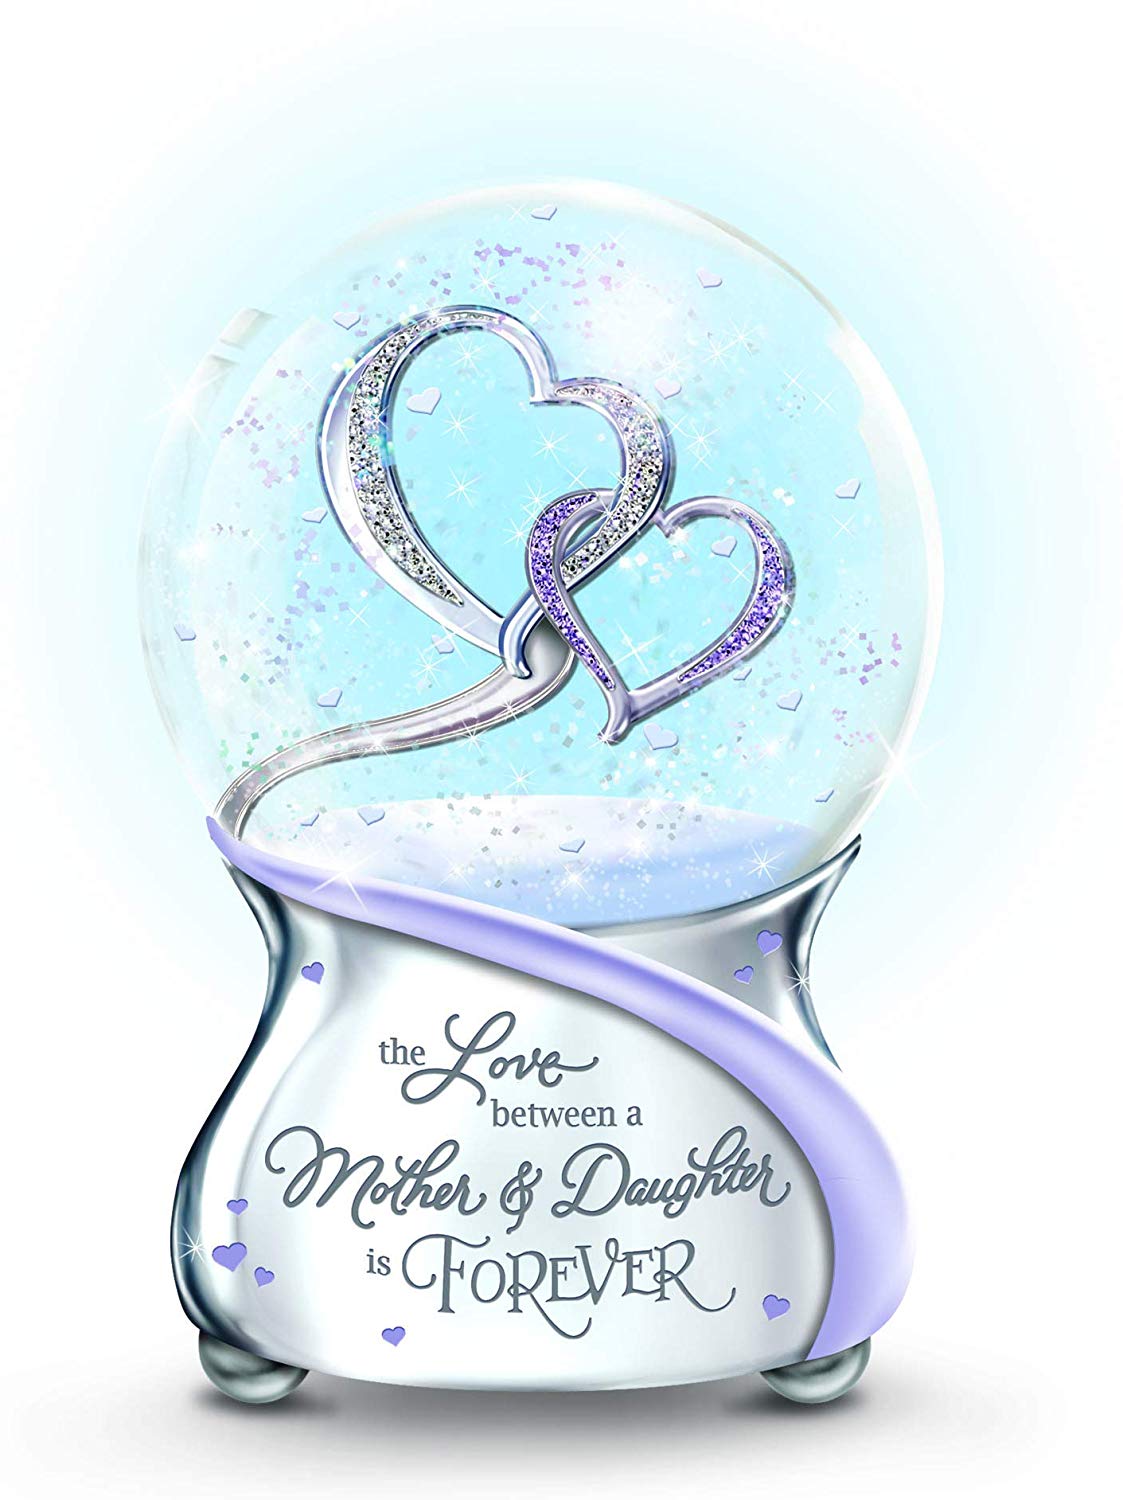 The Bradford Exchange 'Love Between Mother And Daughter Is Forever' Glitter Globe